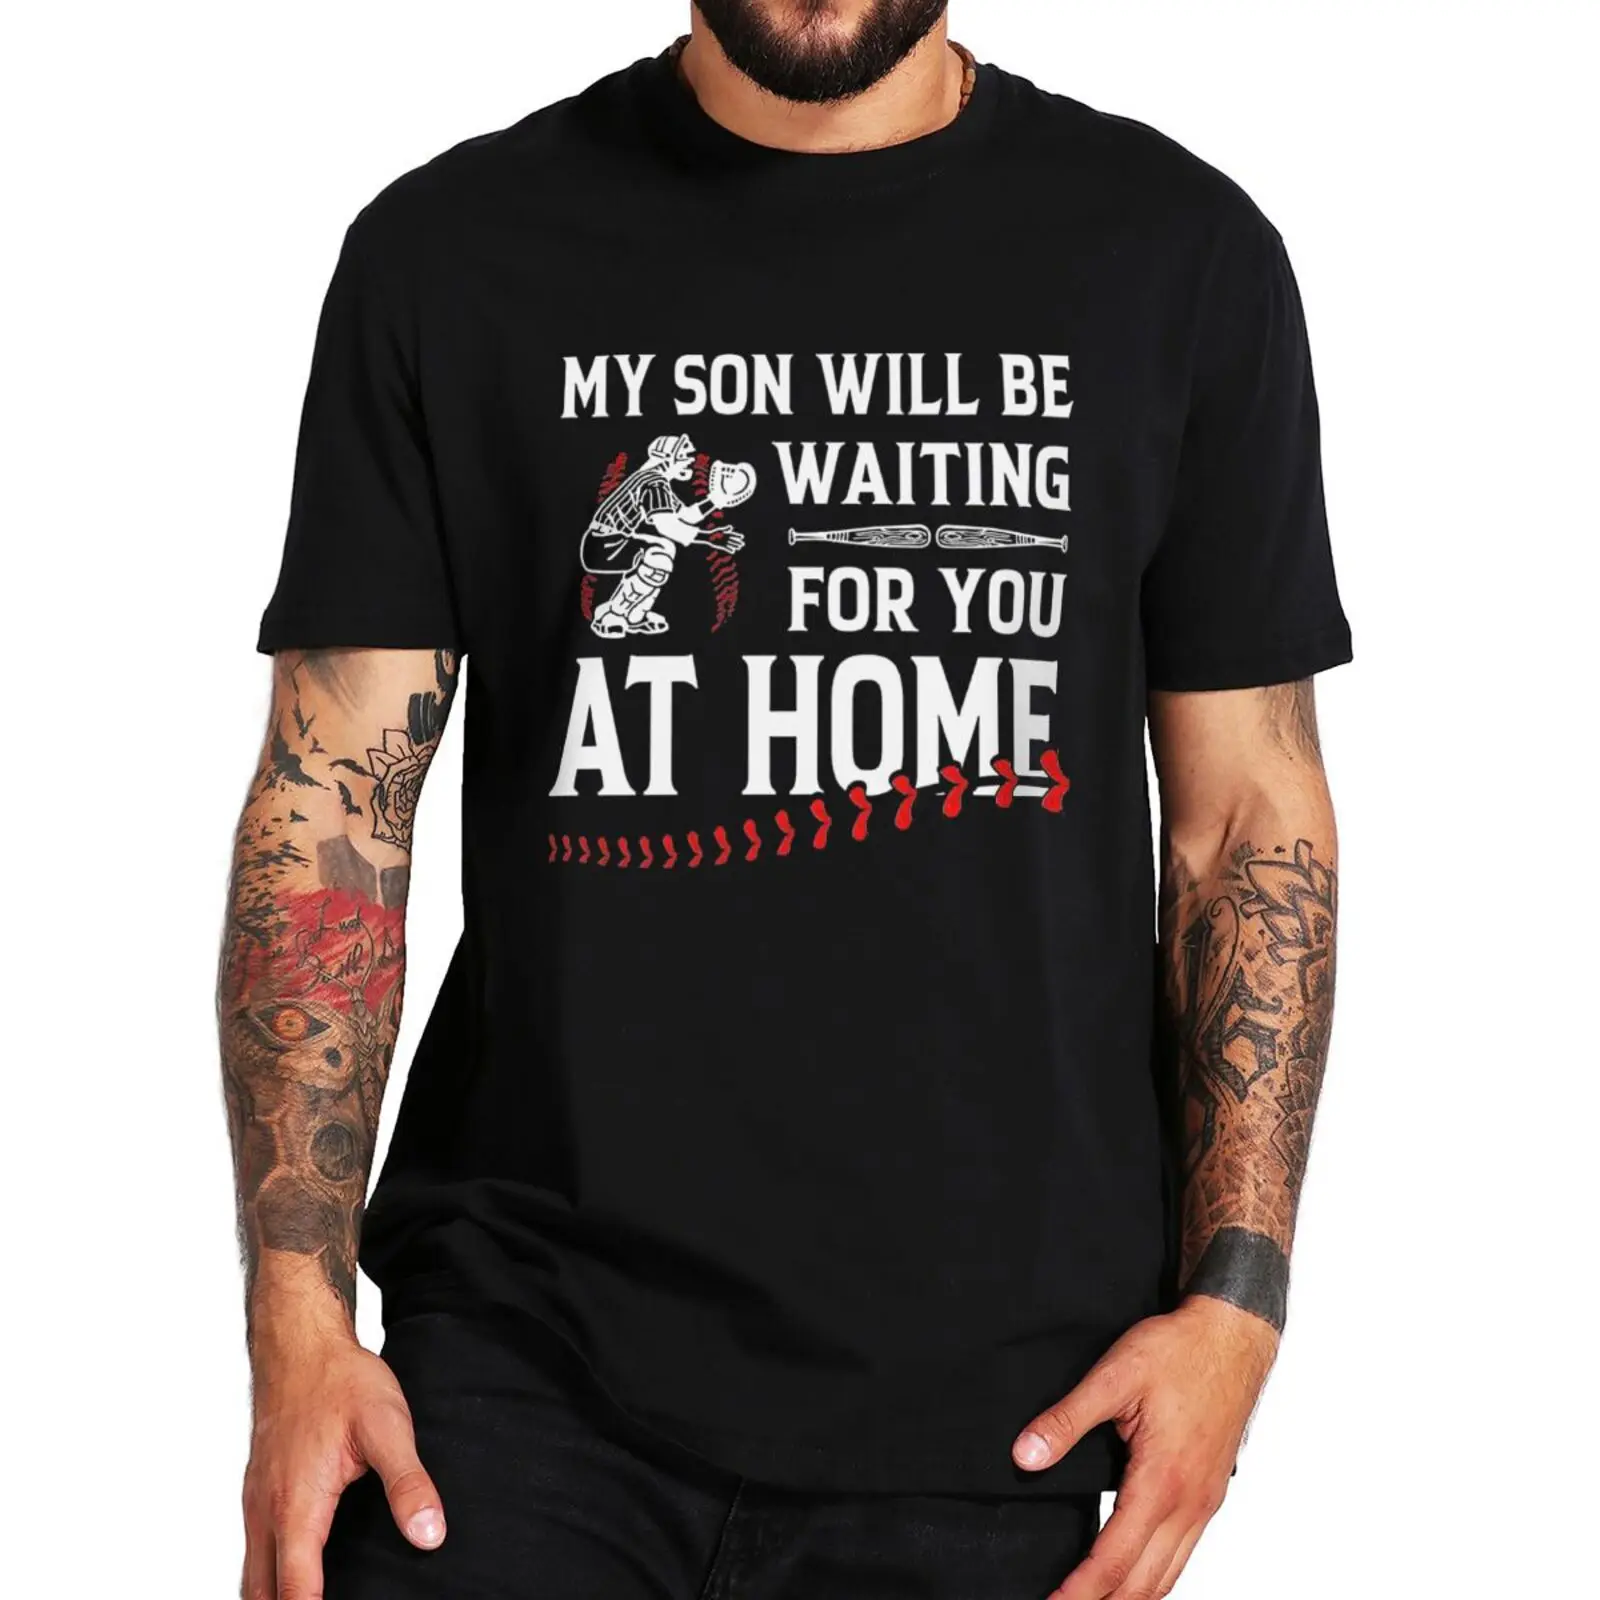 

Baseball Player T Shirt My Son Will Be Waiting For You At Home Sports Gift Tee Tops 100% Cotton Unisex Summer Casual T-shirts